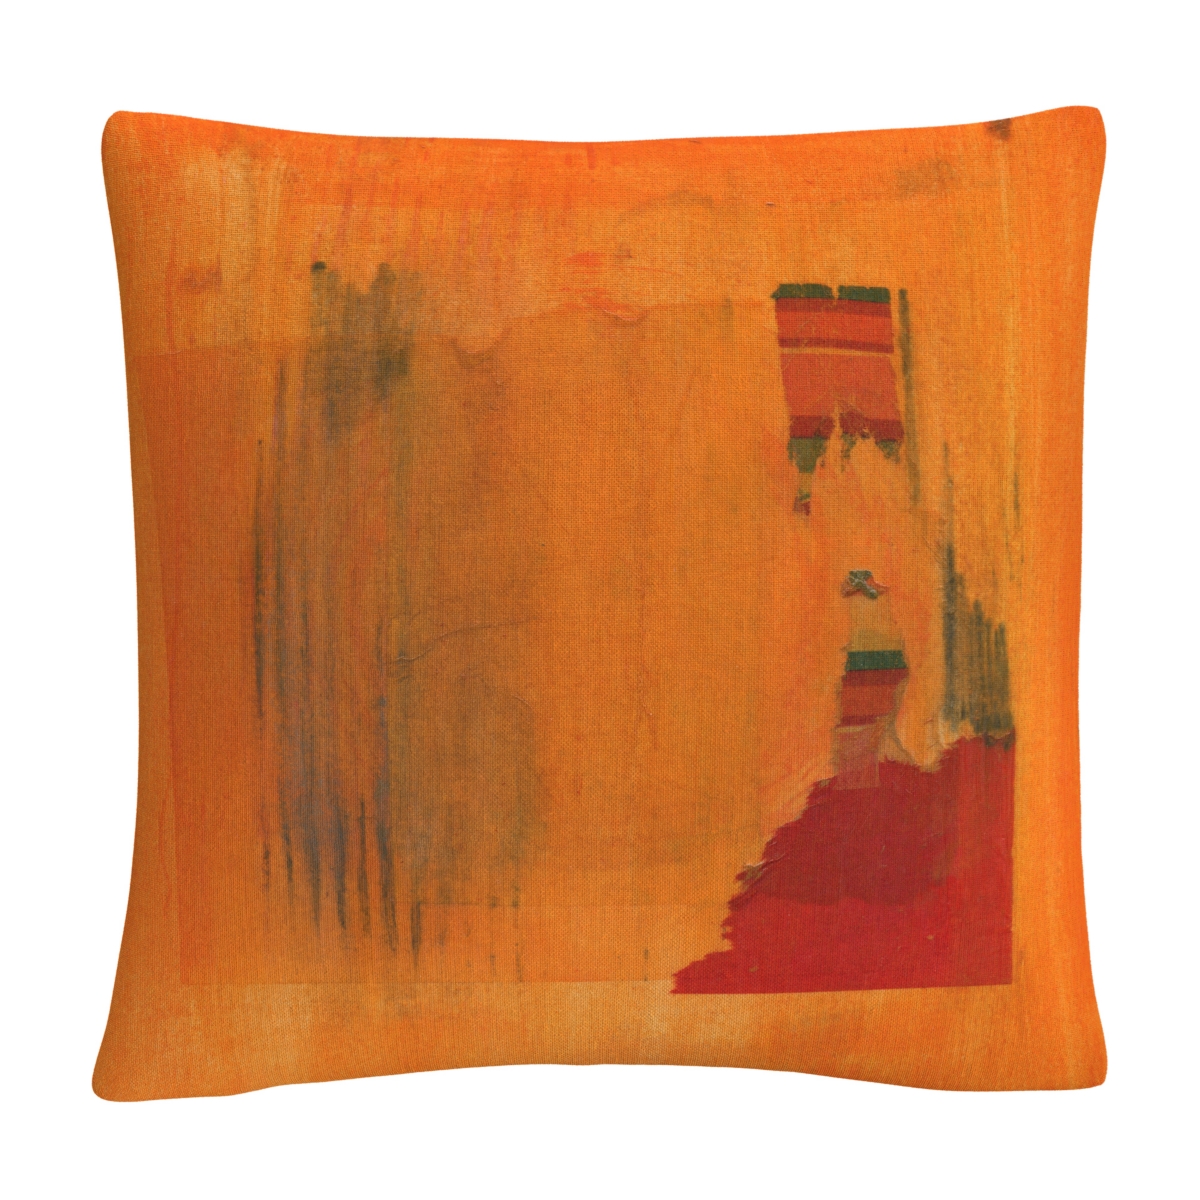 Anthony Sikich Orange Vector Colorful Shapes Line Composition Decorative Pillow, 16 x 16